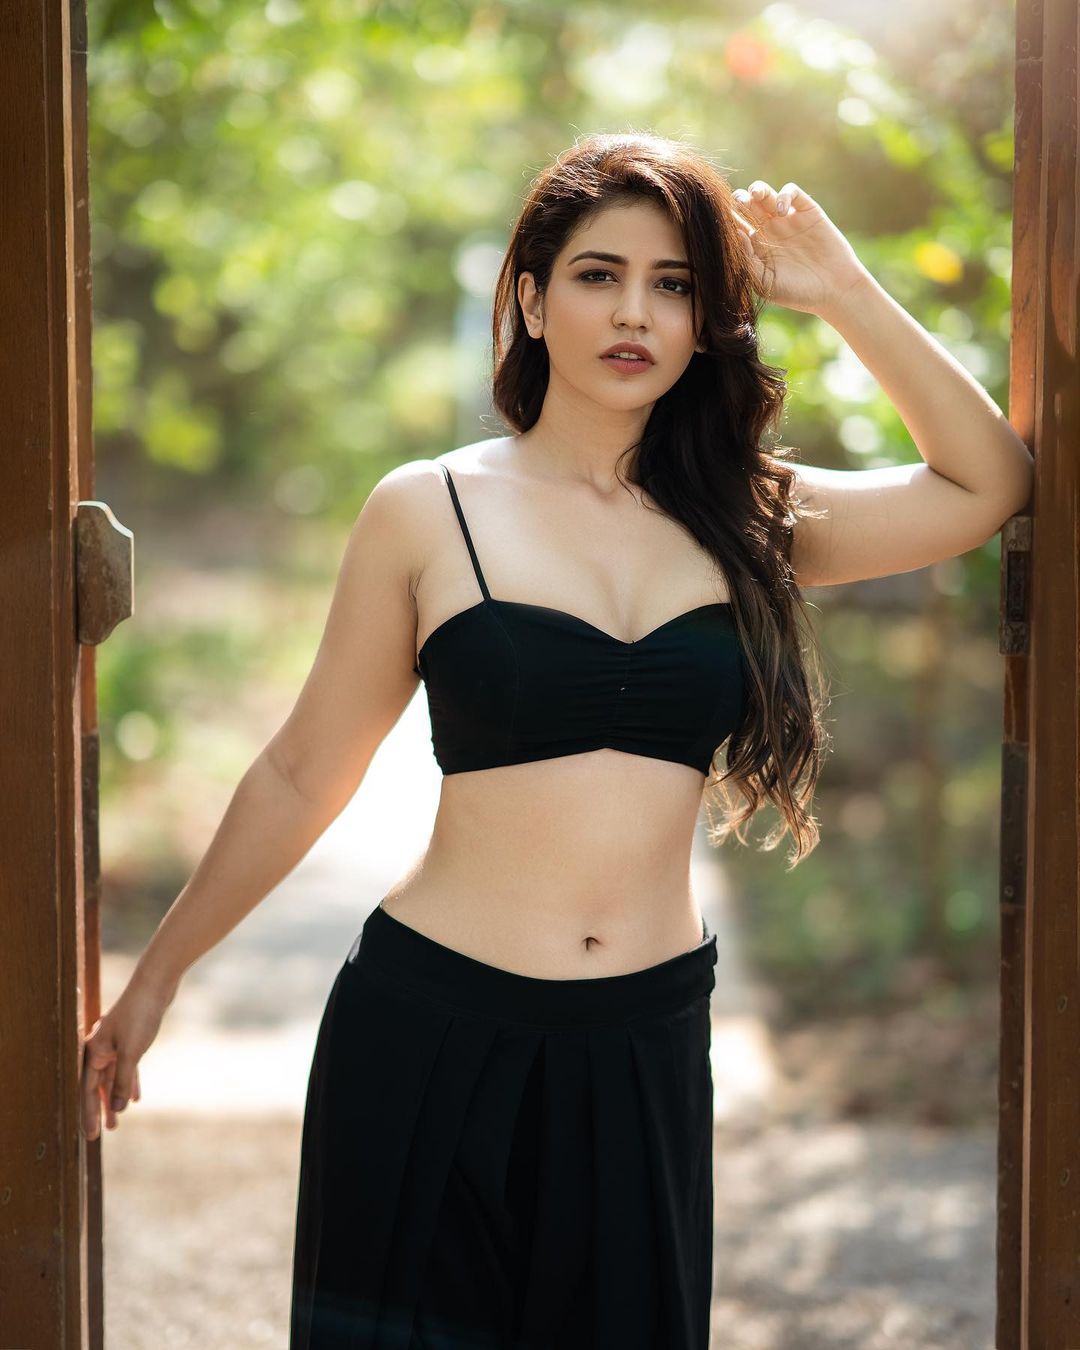 Priyanka Jawalkar looks sizzling hot in this tiny black top flaunting her  sexy toned midriff - see now.